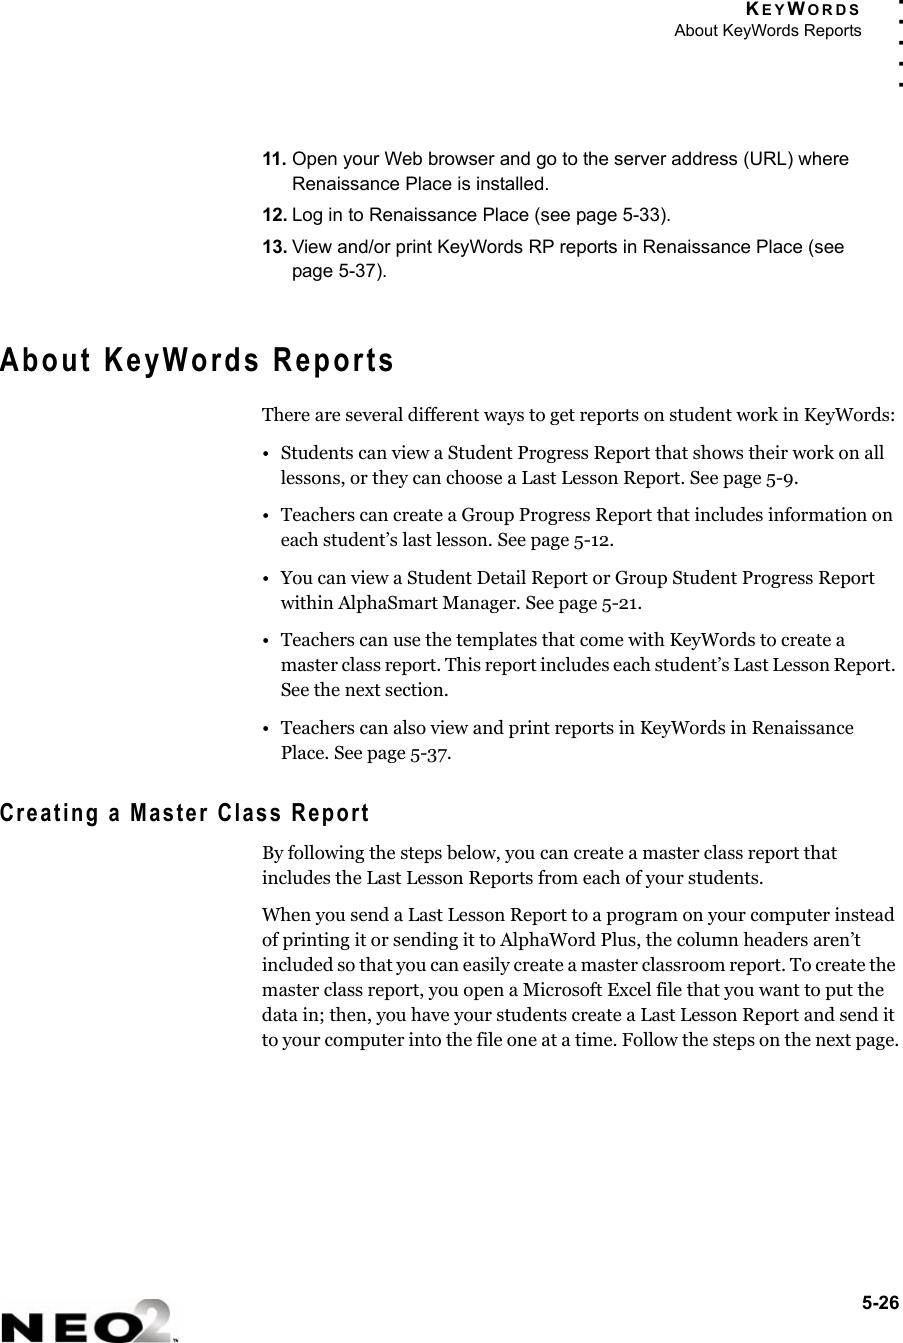 KEYWORDSAbout KeyWords Reports5-26. . . . .11. Open your Web browser and go to the server address (URL) where Renaissance Place is installed.12. Log in to Renaissance Place (see page 5-33).13. View and/or print KeyWords RP reports in Renaissance Place (see page 5-37).About KeyWords ReportsThere are several different ways to get reports on student work in KeyWords:• Students can view a Student Progress Report that shows their work on all lessons, or they can choose a Last Lesson Report. See page 5-9.• Teachers can create a Group Progress Report that includes information on each student’s last lesson. See page 5-12.• You can view a Student Detail Report or Group Student Progress Report within AlphaSmart Manager. See page 5-21.• Teachers can use the templates that come with KeyWords to create a master class report. This report includes each student’s Last Lesson Report. See the next section.• Teachers can also view and print reports in KeyWords in Renaissance Place. See page 5-37.Creating a Master Class ReportBy following the steps below, you can create a master class report that includes the Last Lesson Reports from each of your students. When you send a Last Lesson Report to a program on your computer instead of printing it or sending it to AlphaWord Plus, the column headers aren’t included so that you can easily create a master classroom report. To create the master class report, you open a Microsoft Excel file that you want to put the data in; then, you have your students create a Last Lesson Report and send it to your computer into the file one at a time. Follow the steps on the next page.